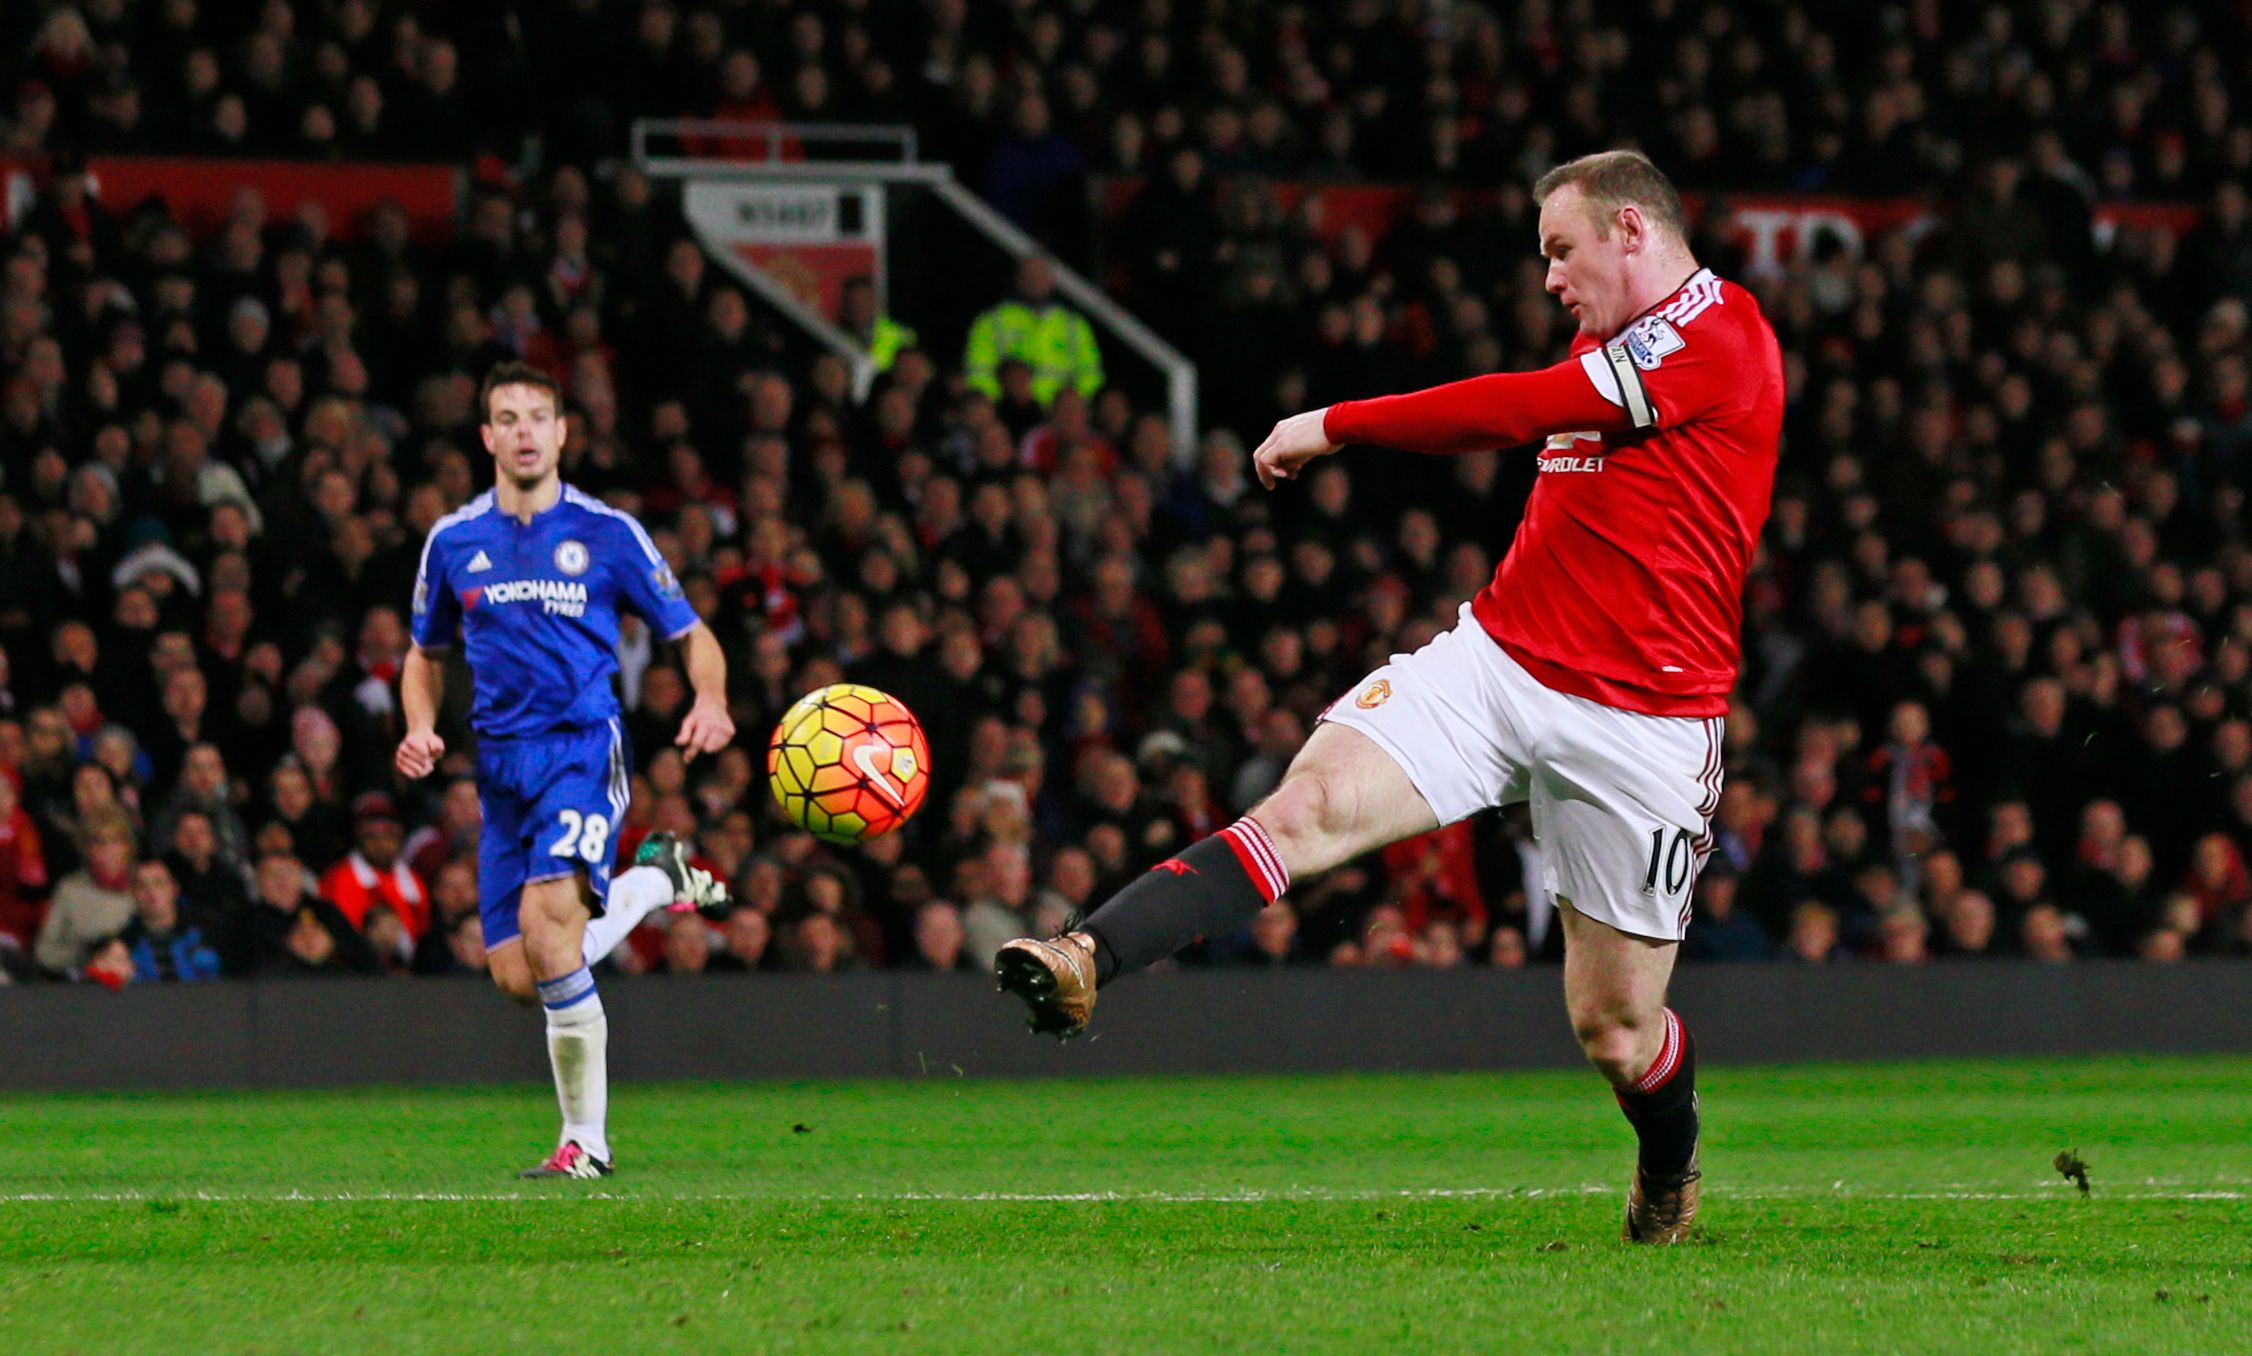 Football Soccer - Manchester United v Chelsea - Barclays Premier League - Old Trafford - 28/12/15
Manchester United's Wayne Rooney has a shot at goal
Action Images via Reuters / Jason Cairnduff
Livepic
EDITORIAL USE ONLY. No use with unauthorized audio, video, data, fixture lists, club/league logos or 